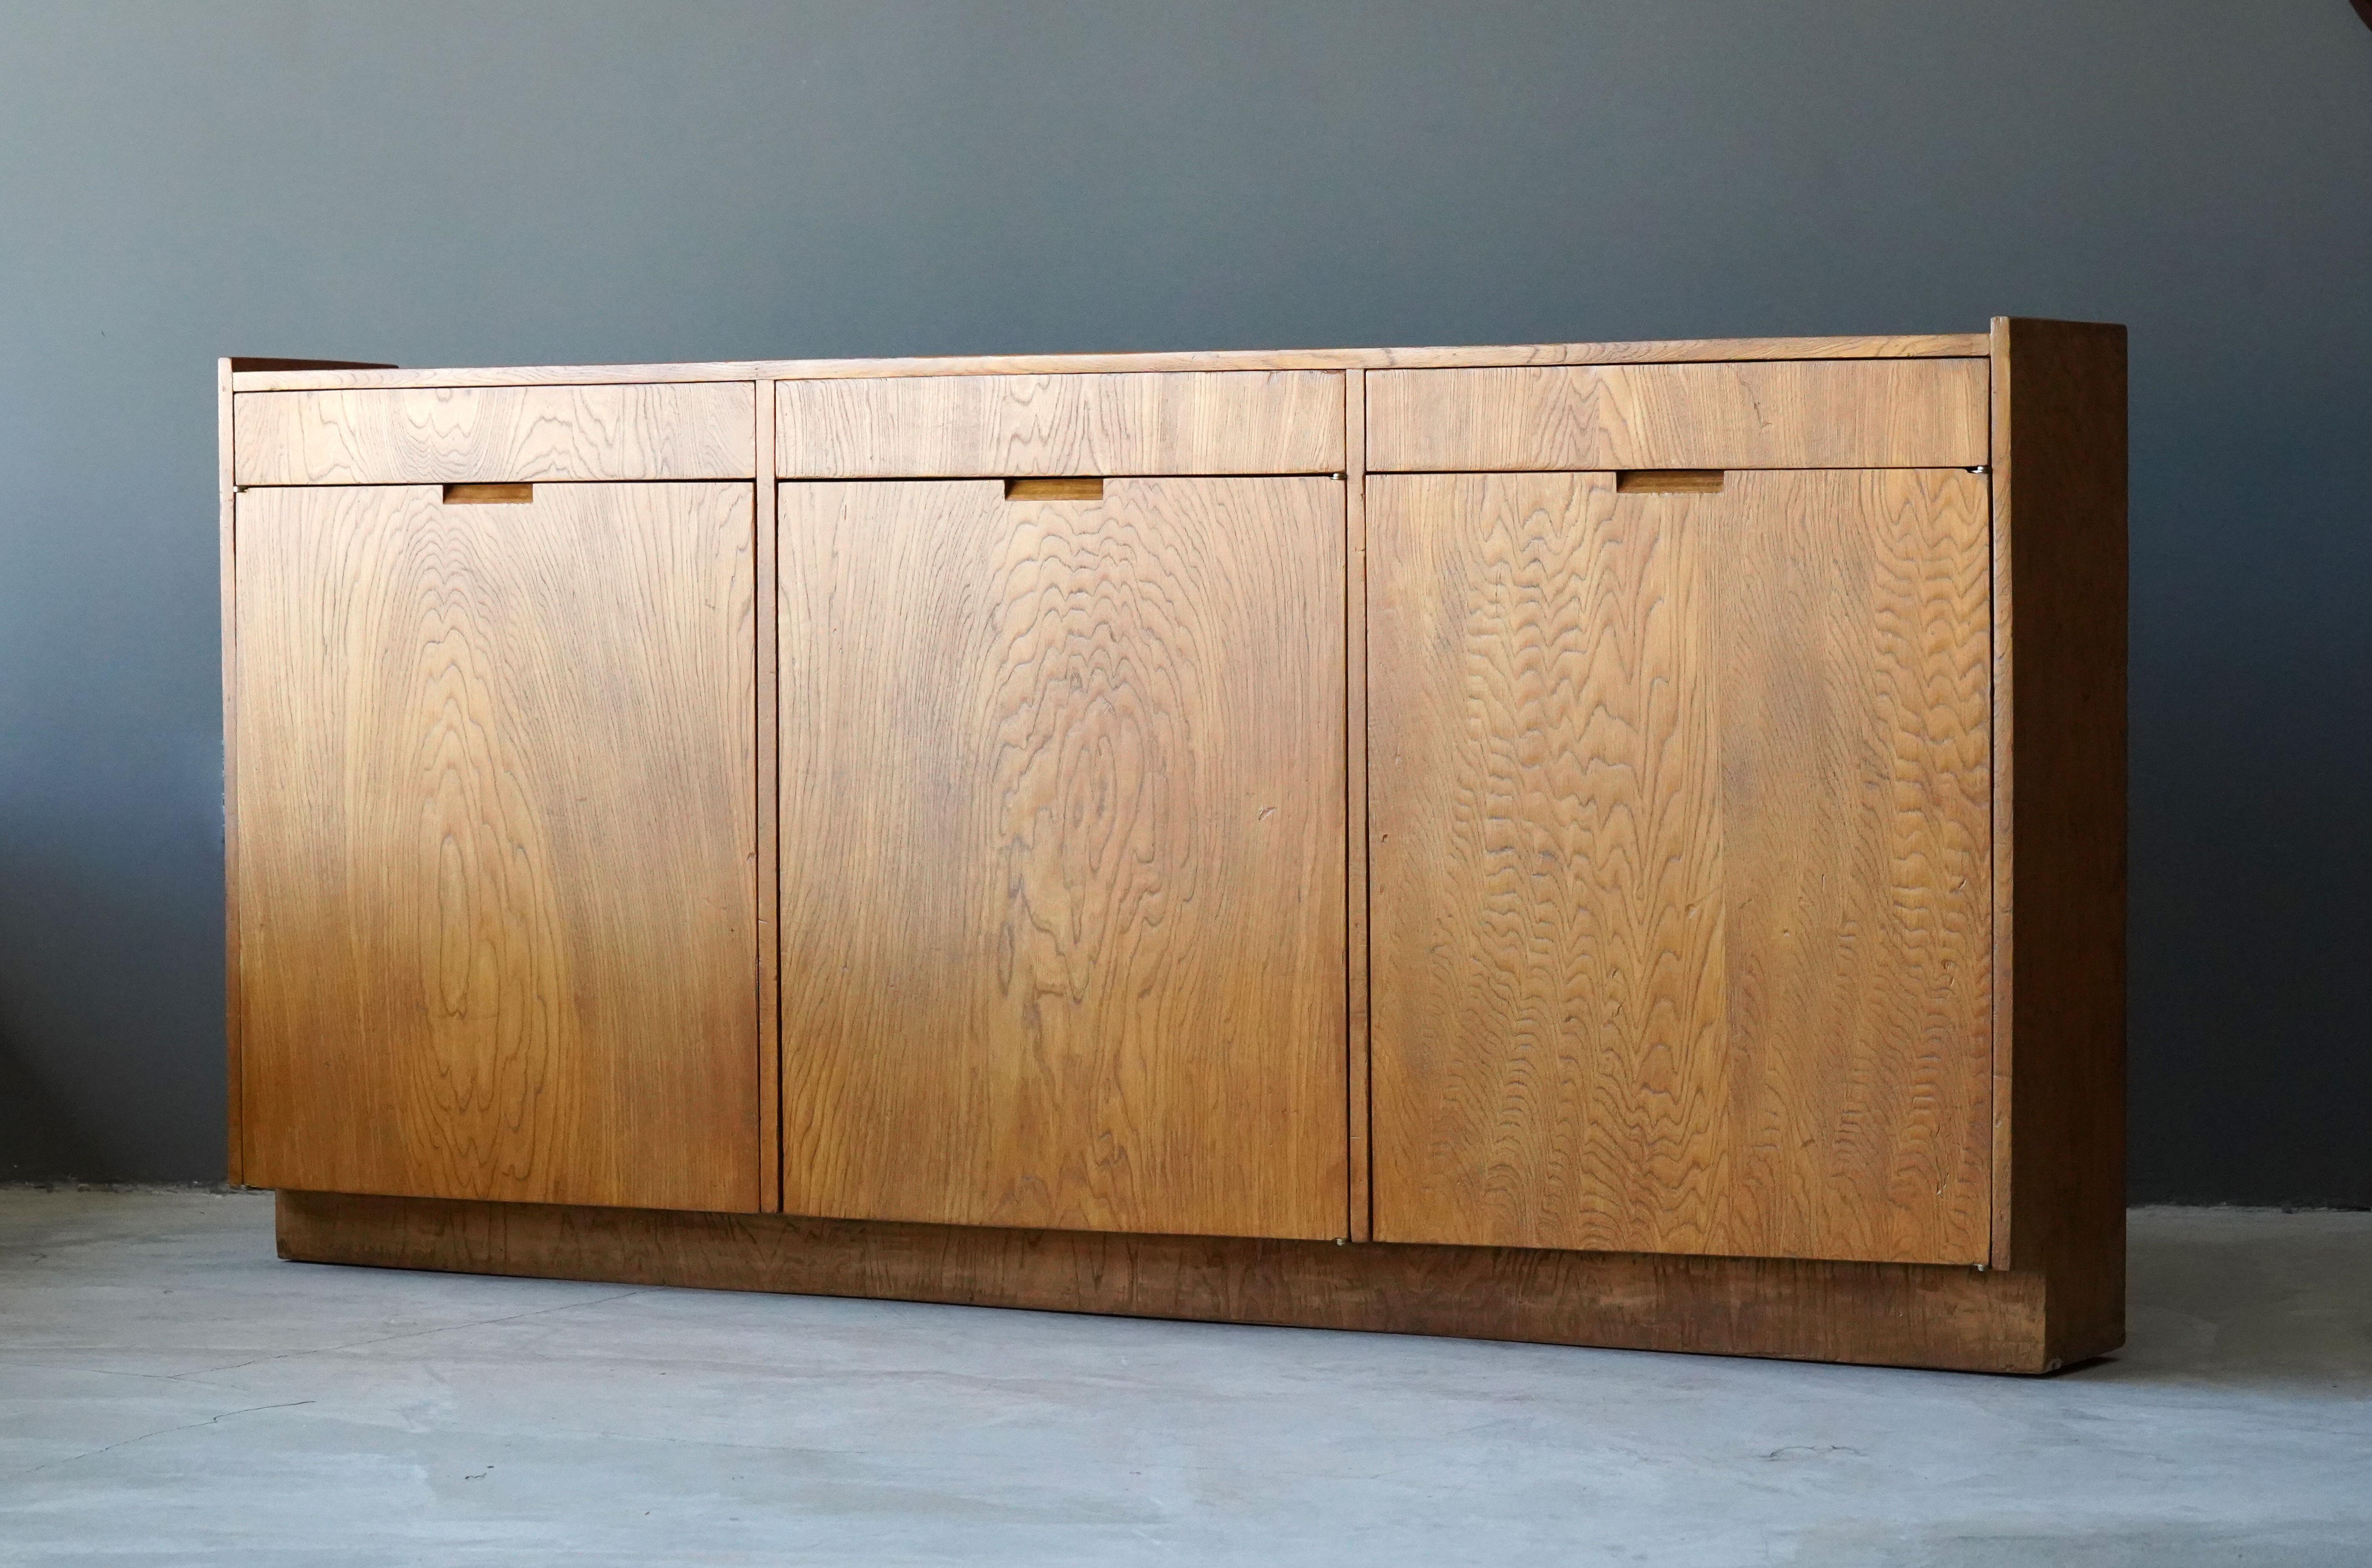 A unique sideboard / cabinet / credenza. Designed by Richard Neutra for the Brown Sidney House, Holmby Hills, Los Angeles. Detailed provenance available upon request, circa 1955.

Other designers of the period include Paul Frankl, T.H.